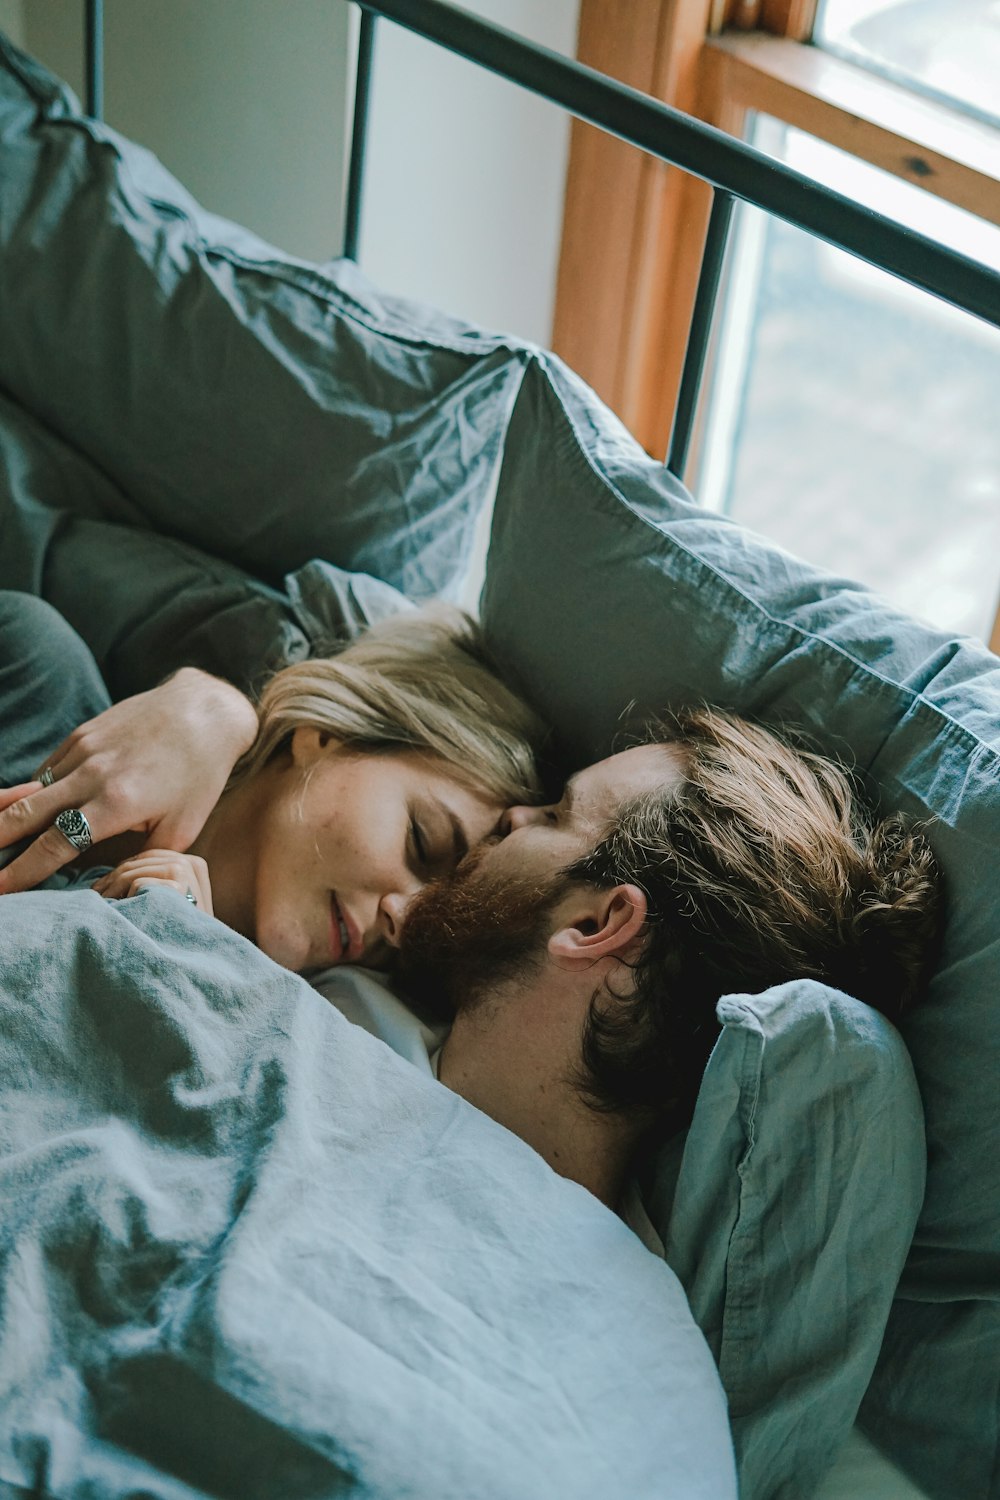 750+ Couple Sleeping Pictures  Download Free Images on Unsplash